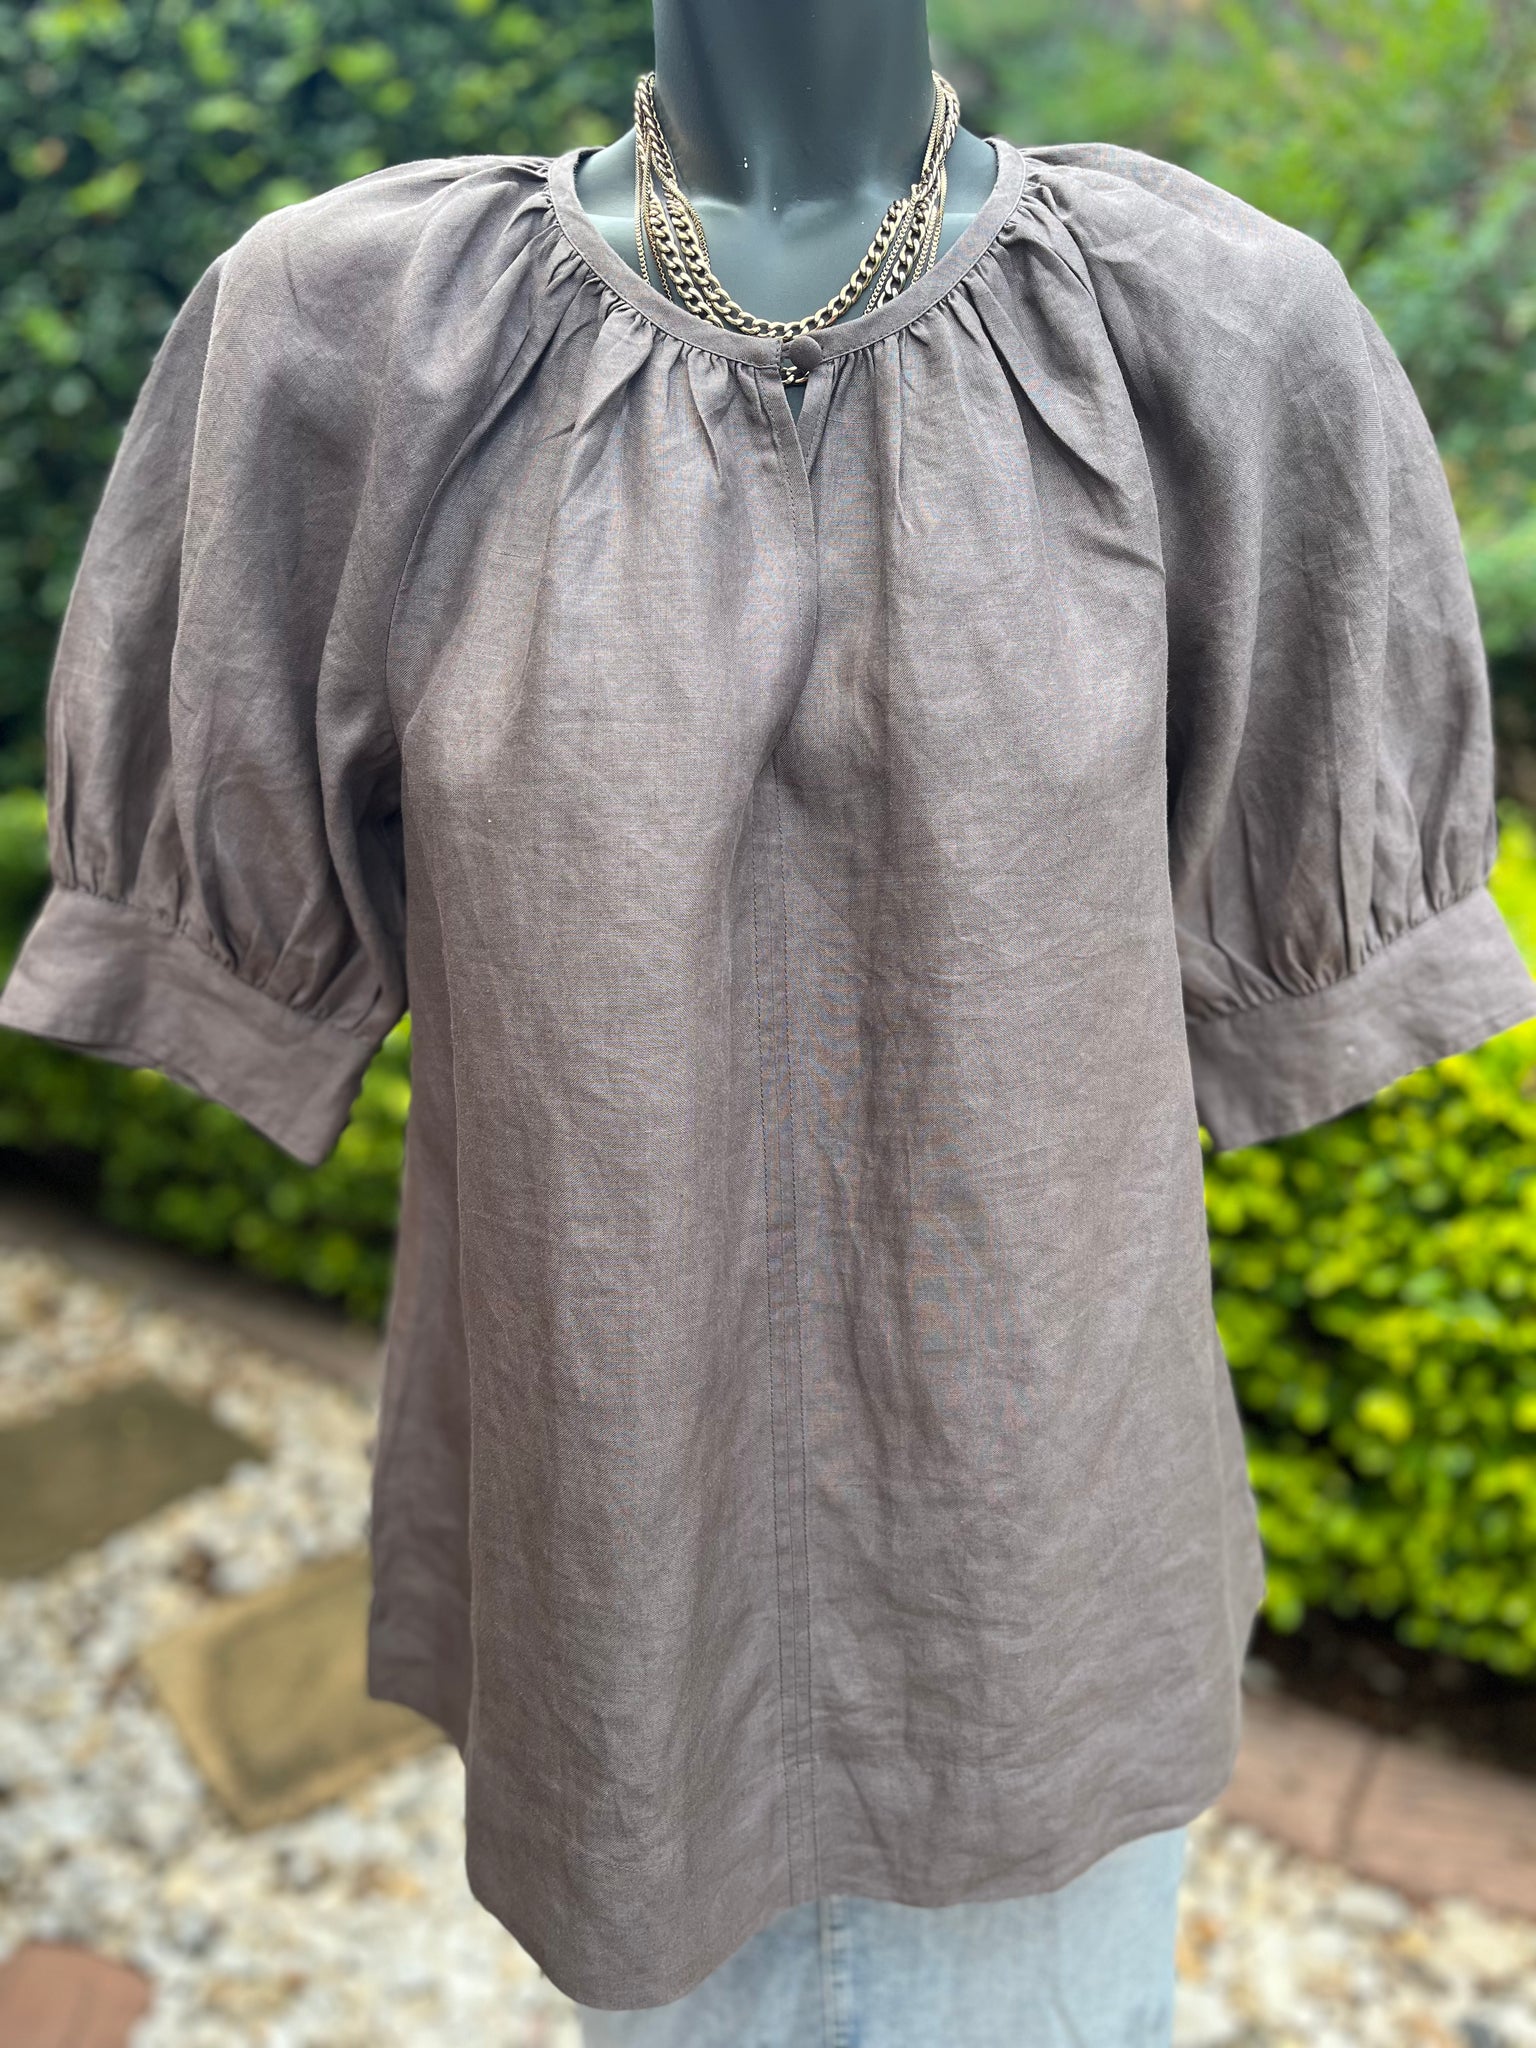 Country Road Linen Grey Top with puff sleeves - Size 8